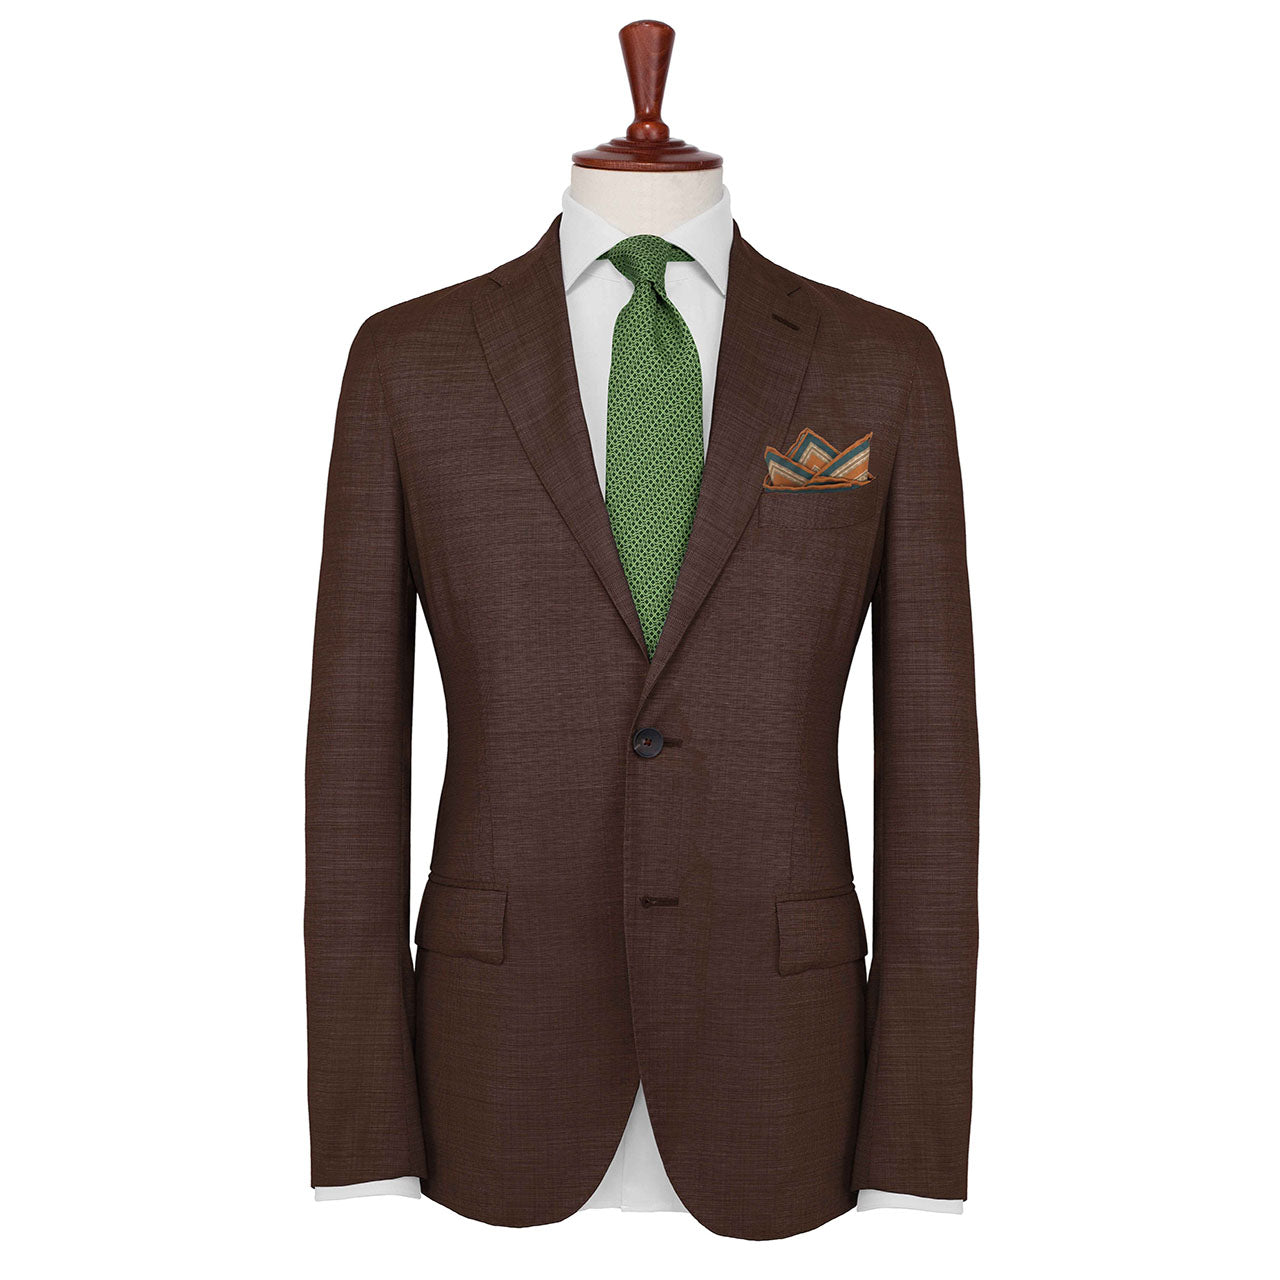 Racing Allegory Fern Green and Coconut Pocket Square